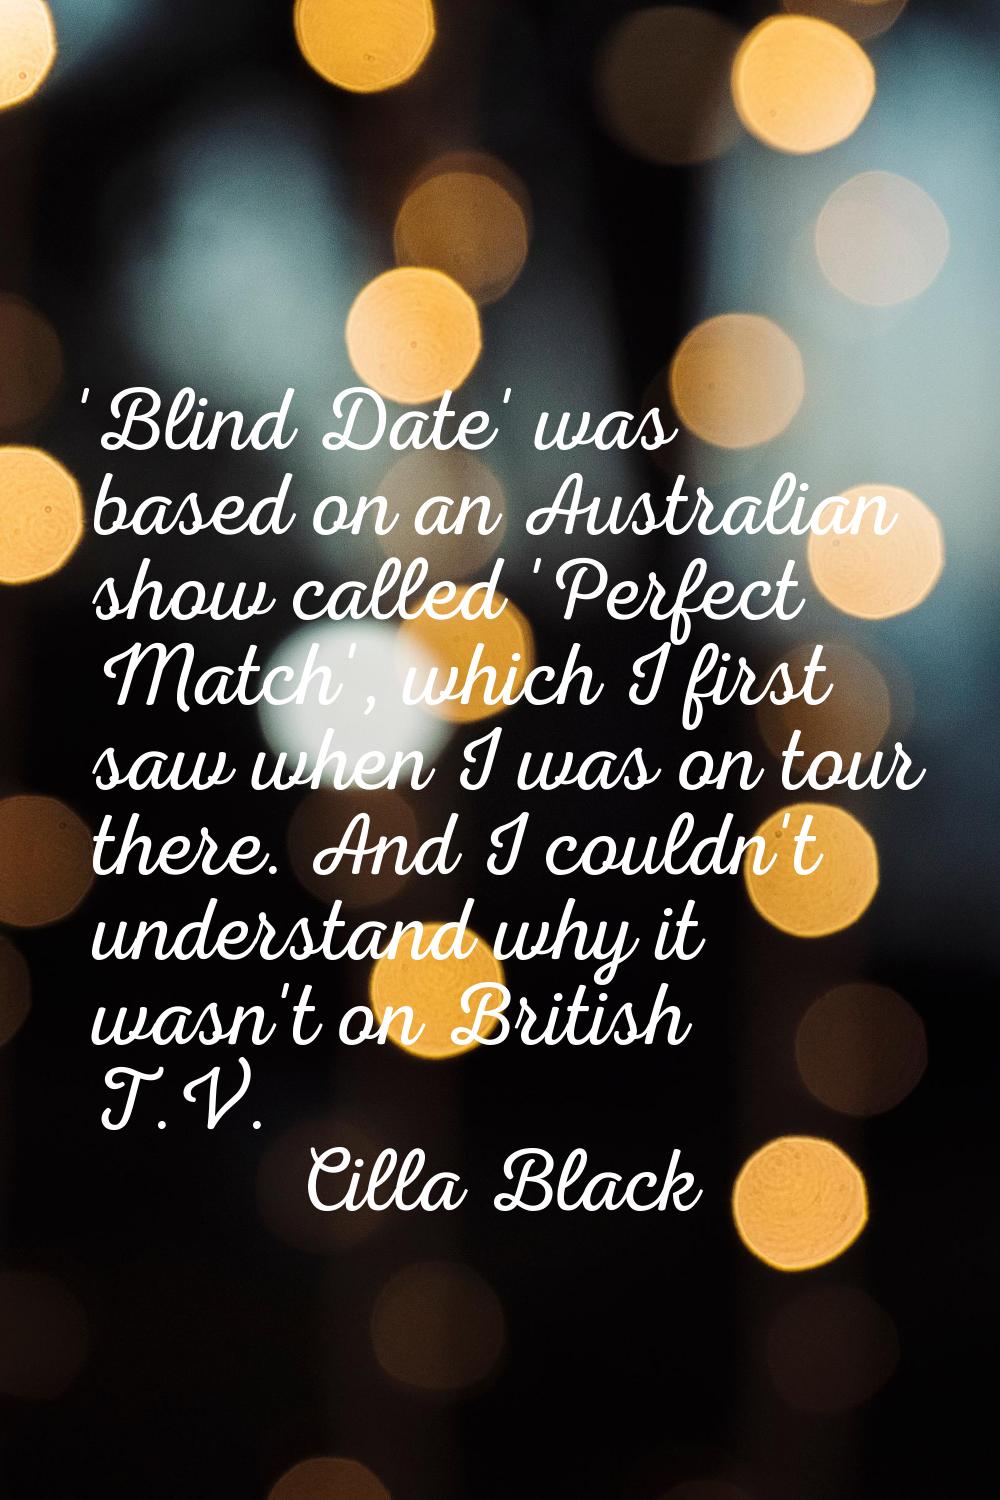 'Blind Date' was based on an Australian show called 'Perfect Match', which I first saw when I was o